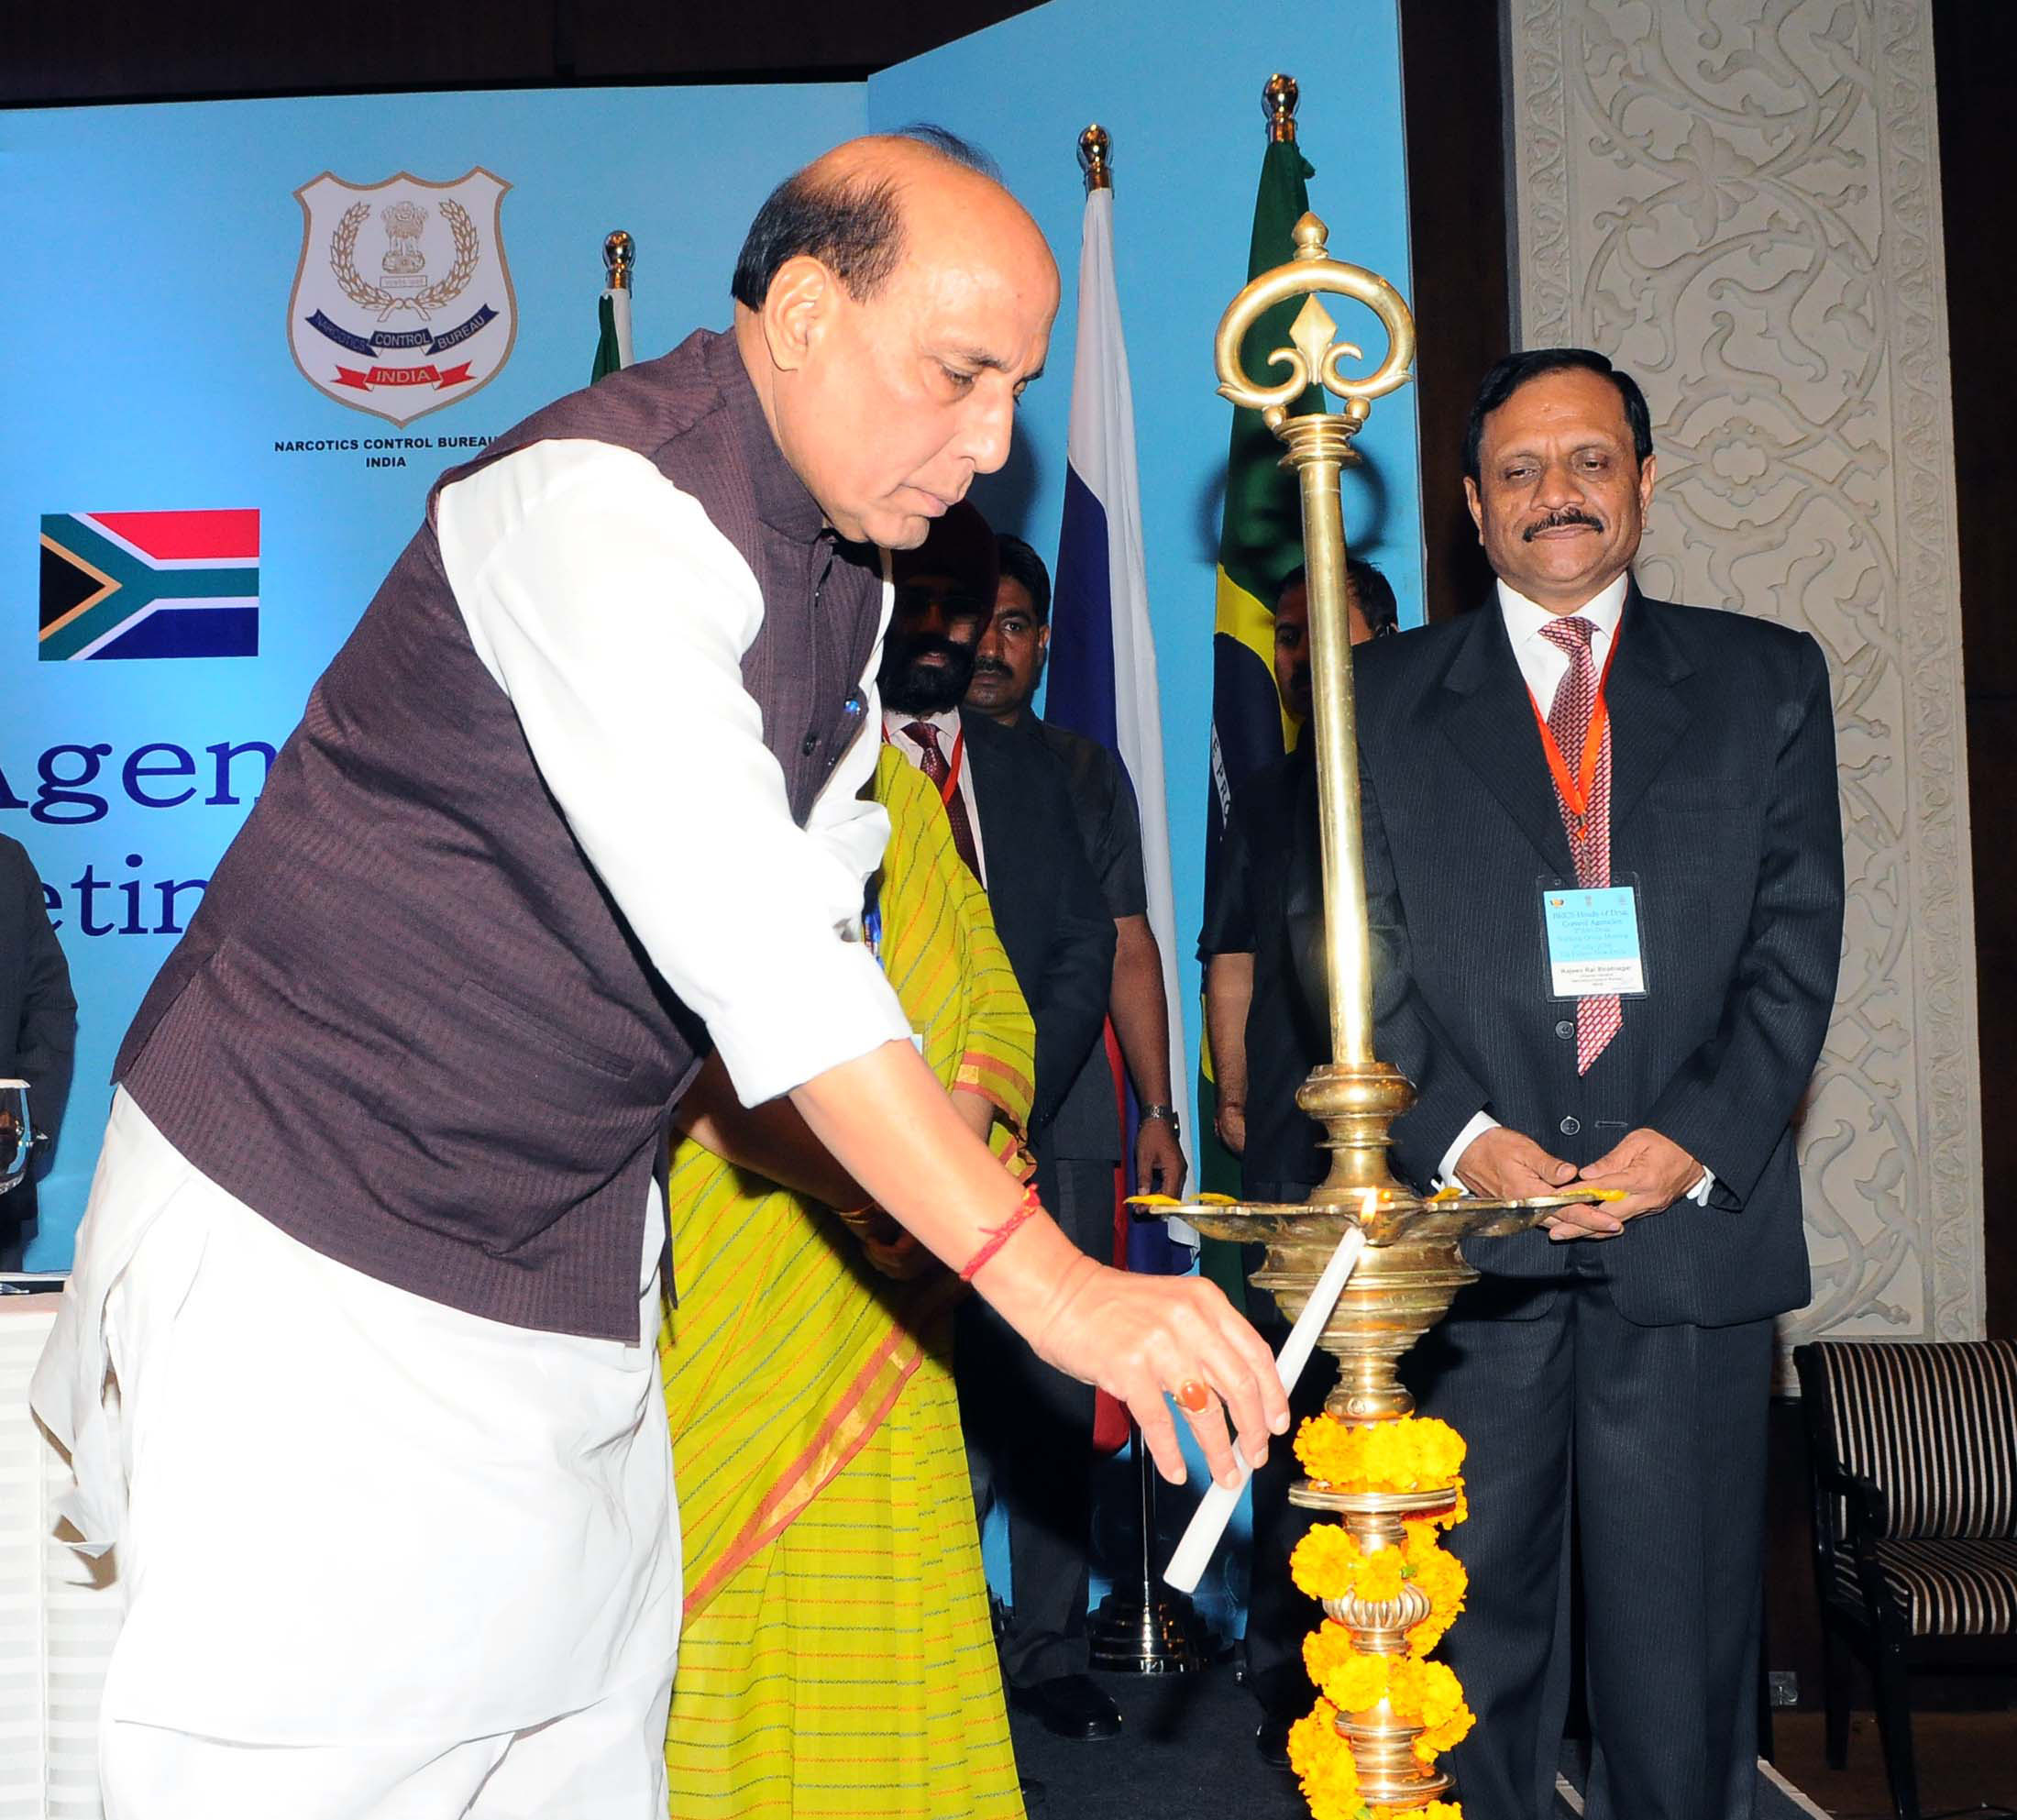 The Union Home Minister, Shri Rajnath Singh lighting the lamp to inaugurate the BRICS Heads of Drug Control Agencies Working Group Meeting, in New Delhi on July 08, 2016.